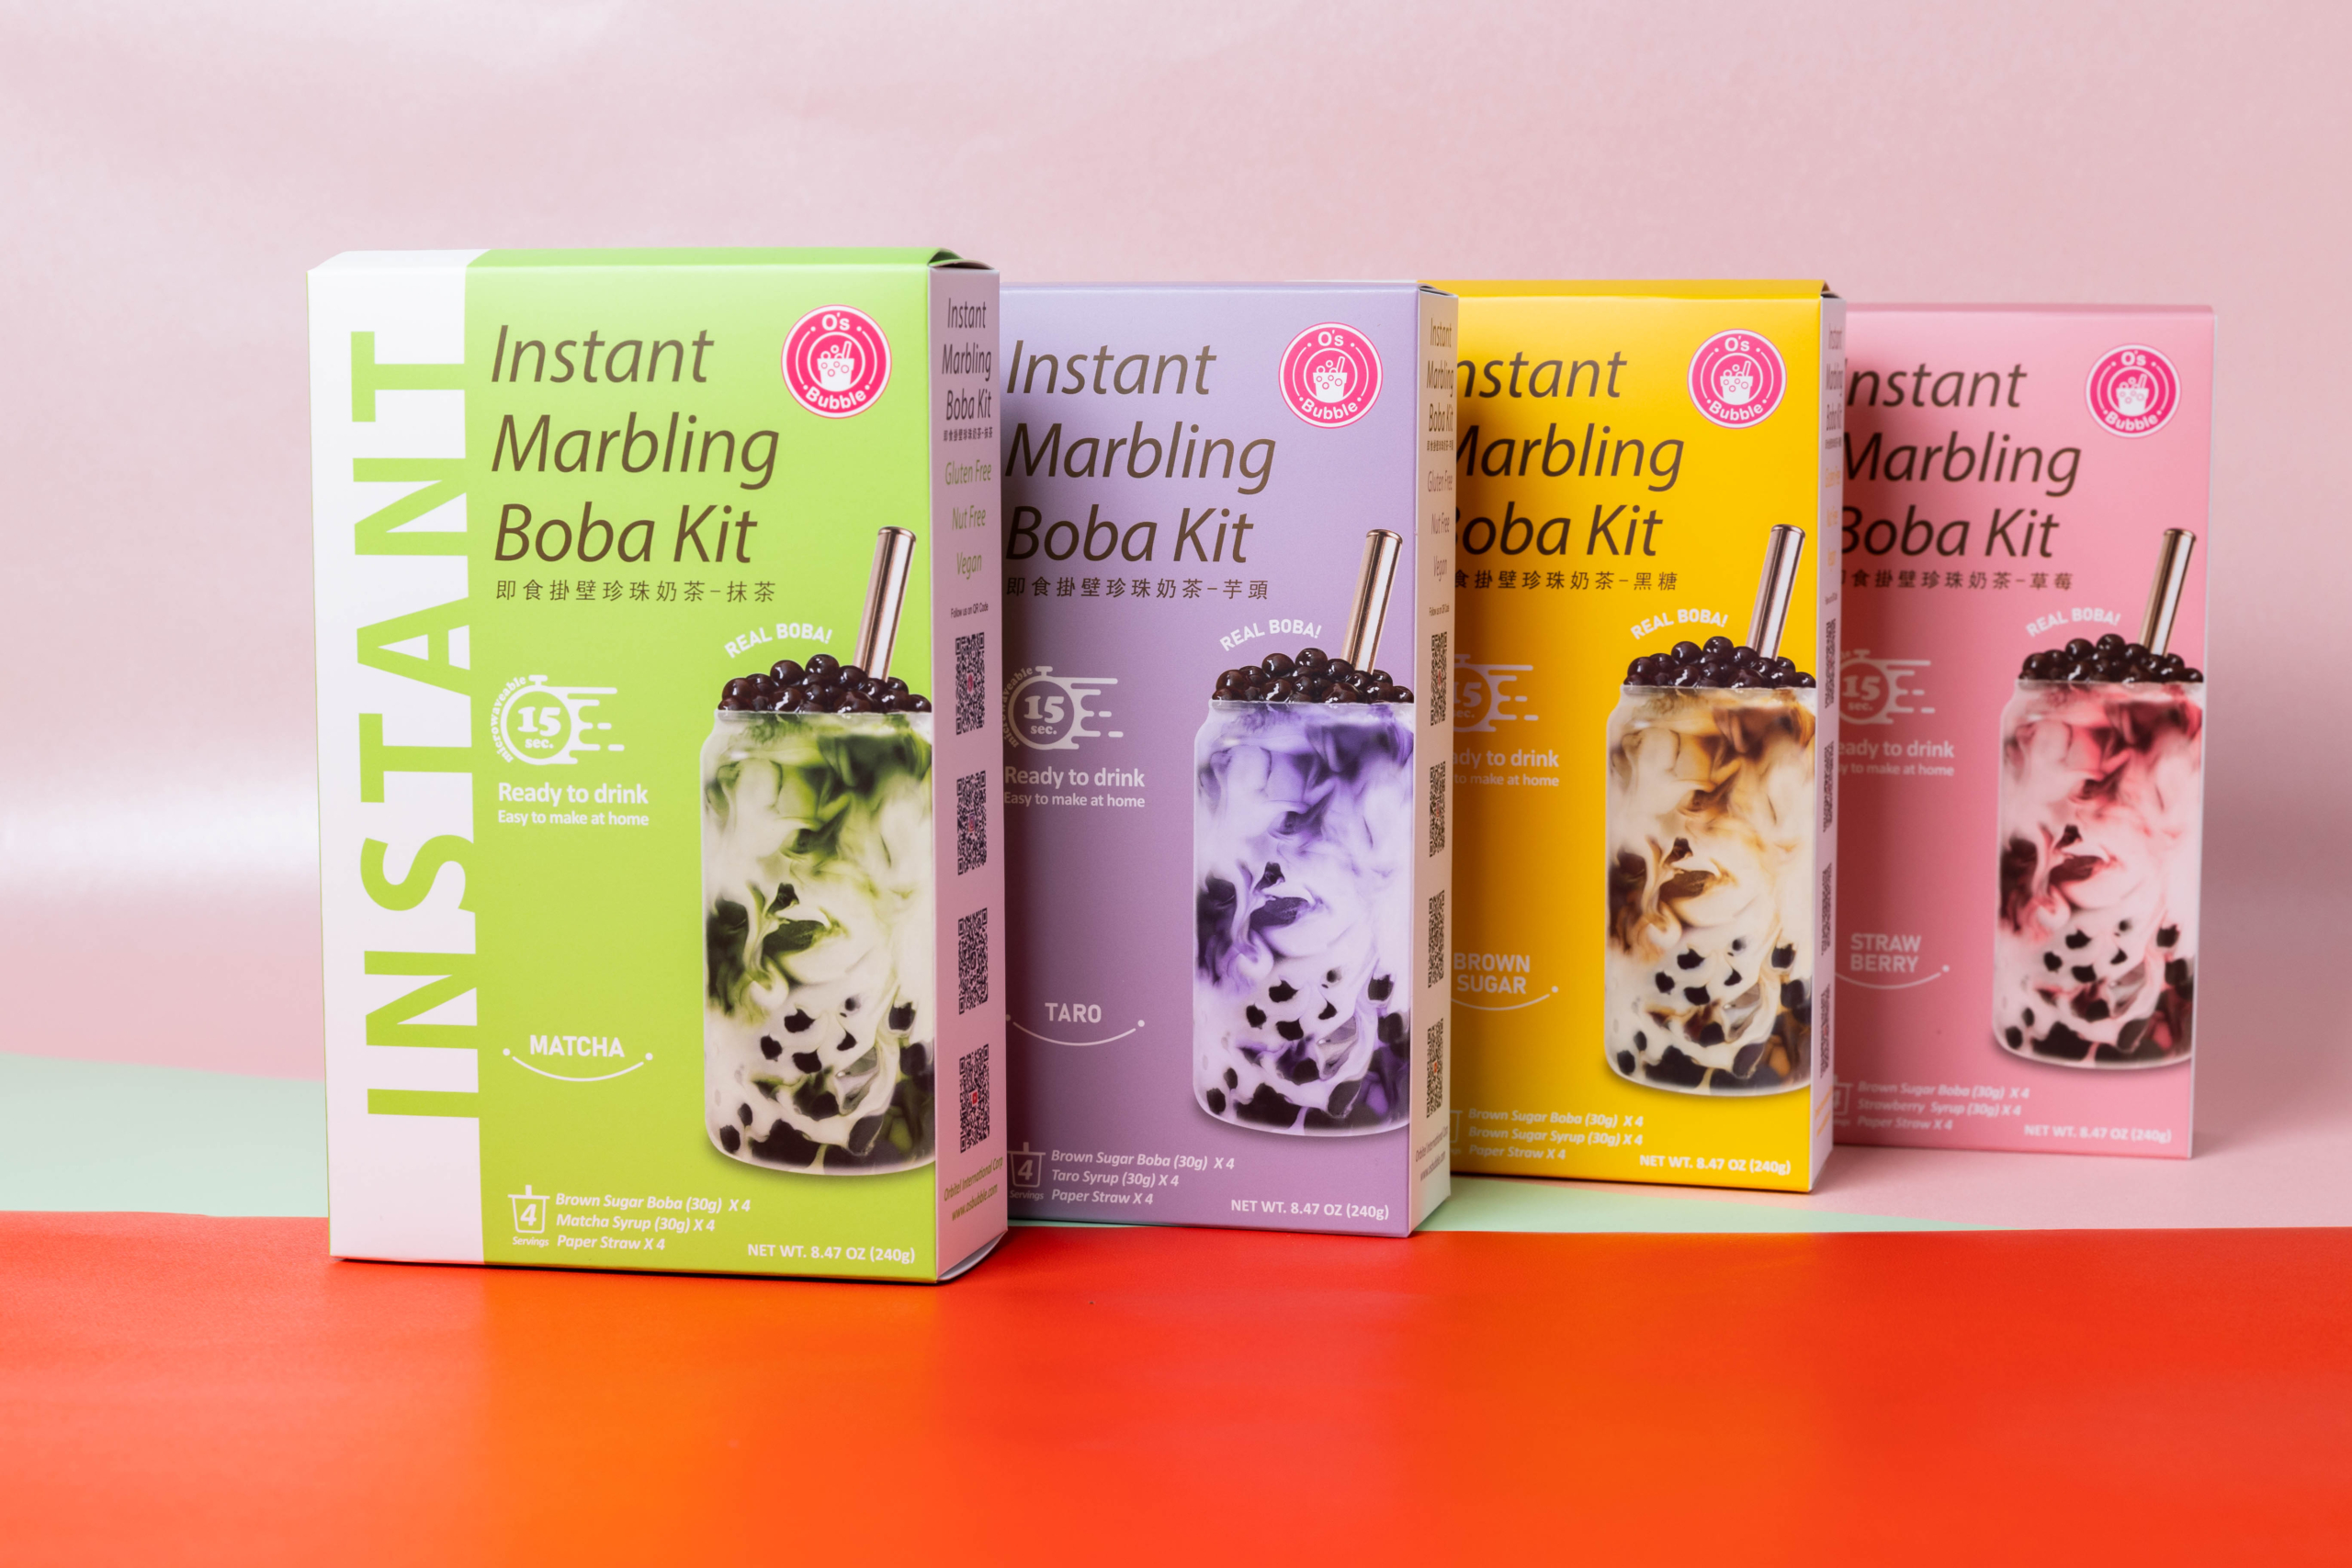 Boba News: “The Truth of Marbling Boba Tea You Have to Know!”